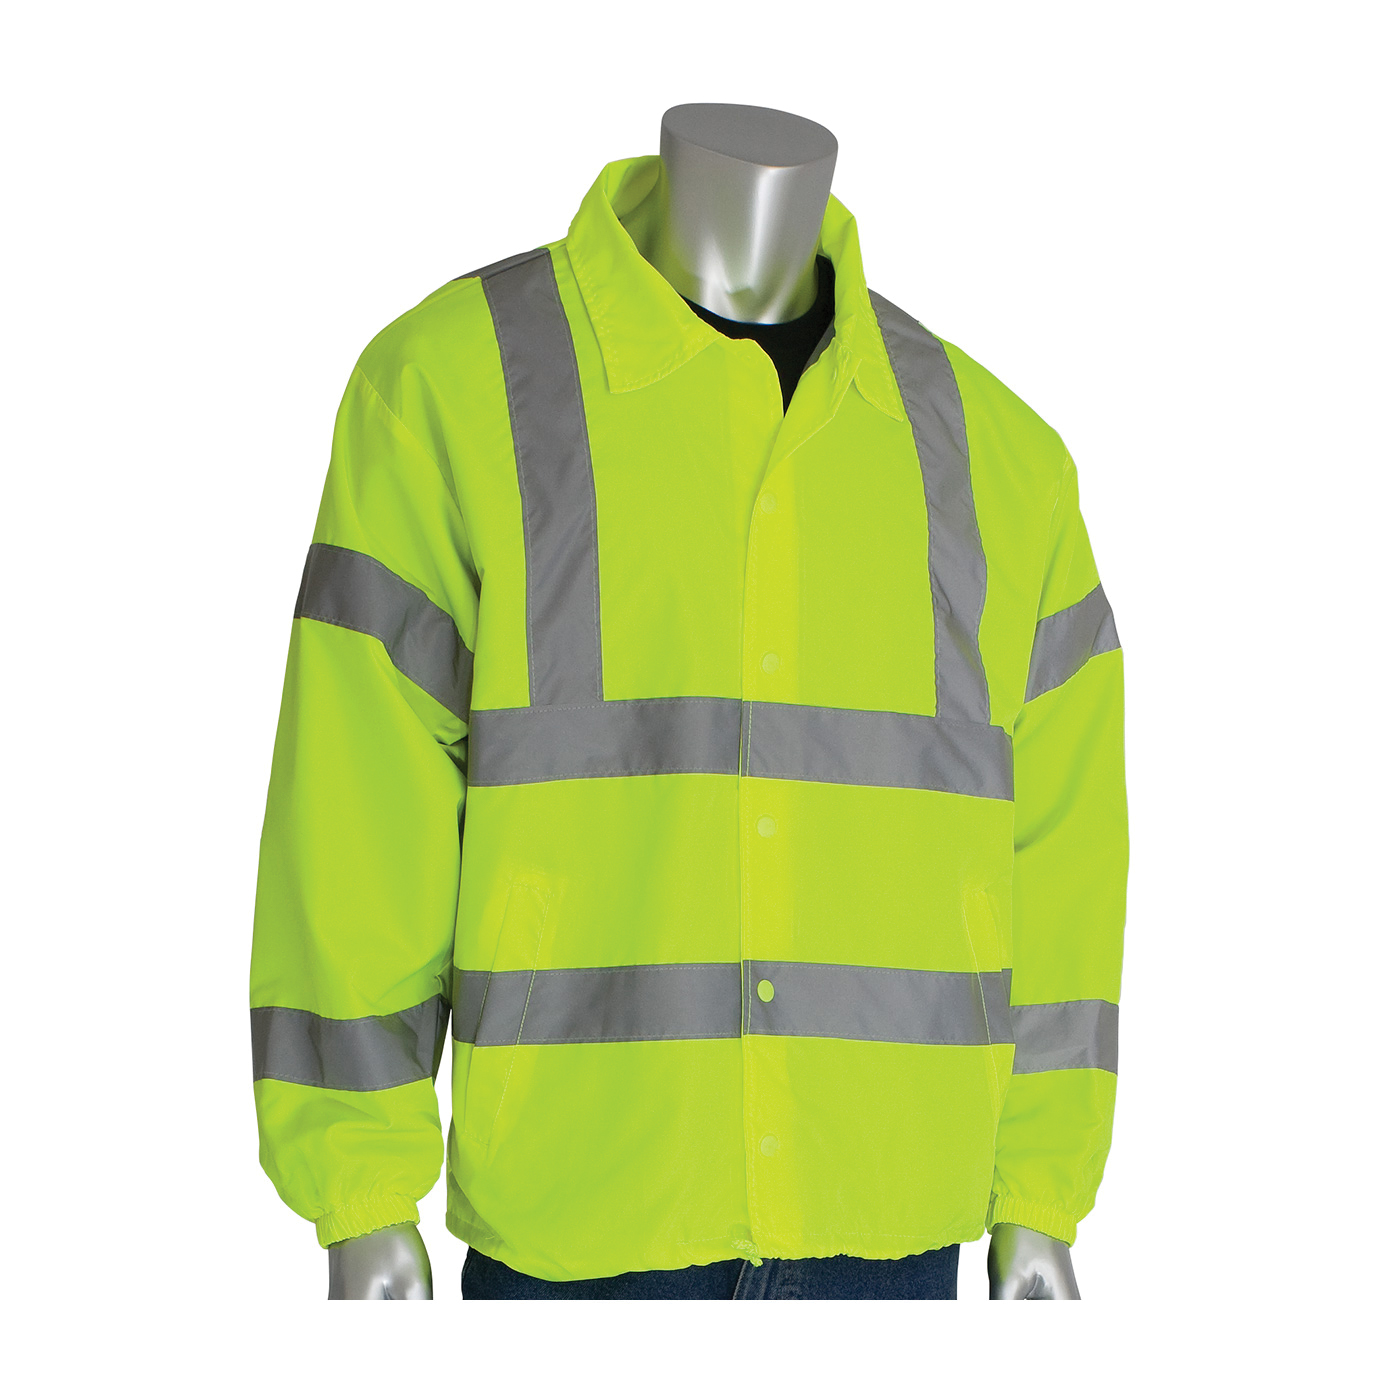 PIP® 333-WBLY-4X Classic Wind Breaker Jacket, Hi-Viz Lime Yellow, Polyester, 63 in Chest, Specifications Met: ANSI 107 Class 3 Type R